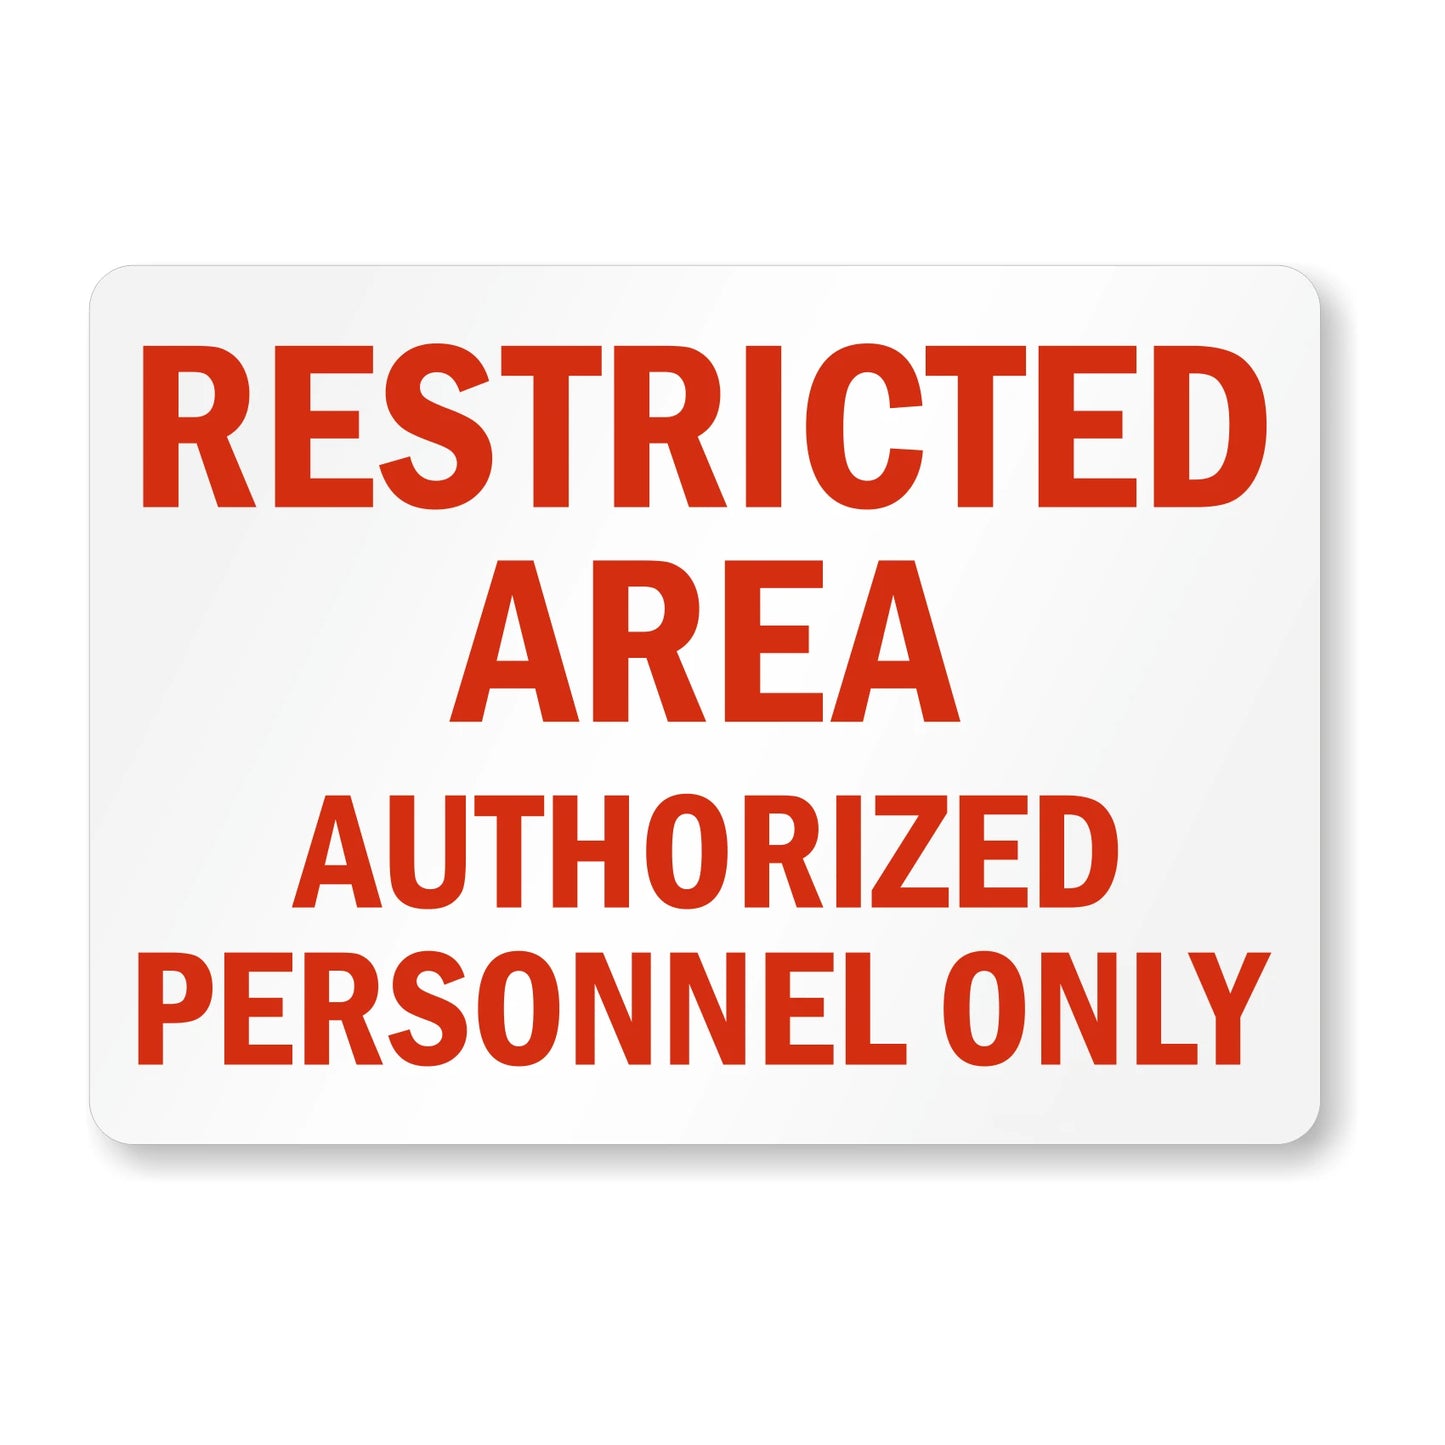 Authorized Personnel Only01